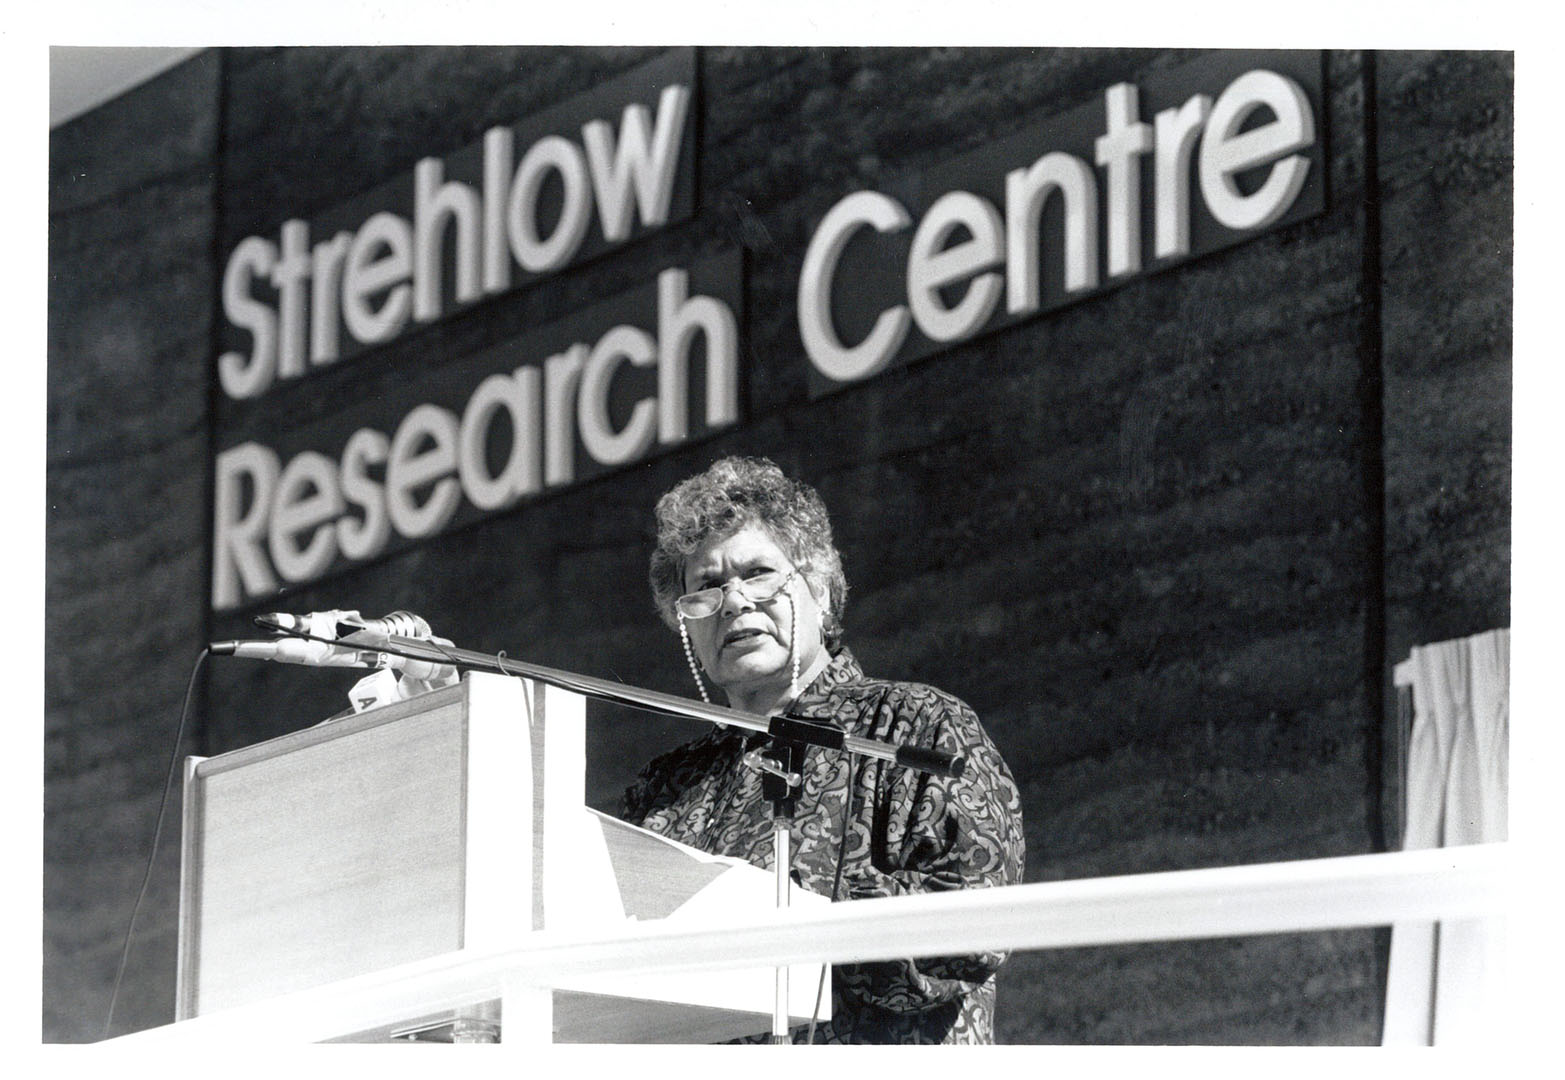 Lowitja O’Dononhue, Opening of the Strehlow Research Centre, Alice Springs, 26 June 1991<br>Image courtesy of Strehlow Research Centre, Museum and Art Gallery of the NT, Photographer Barry Skipsey.